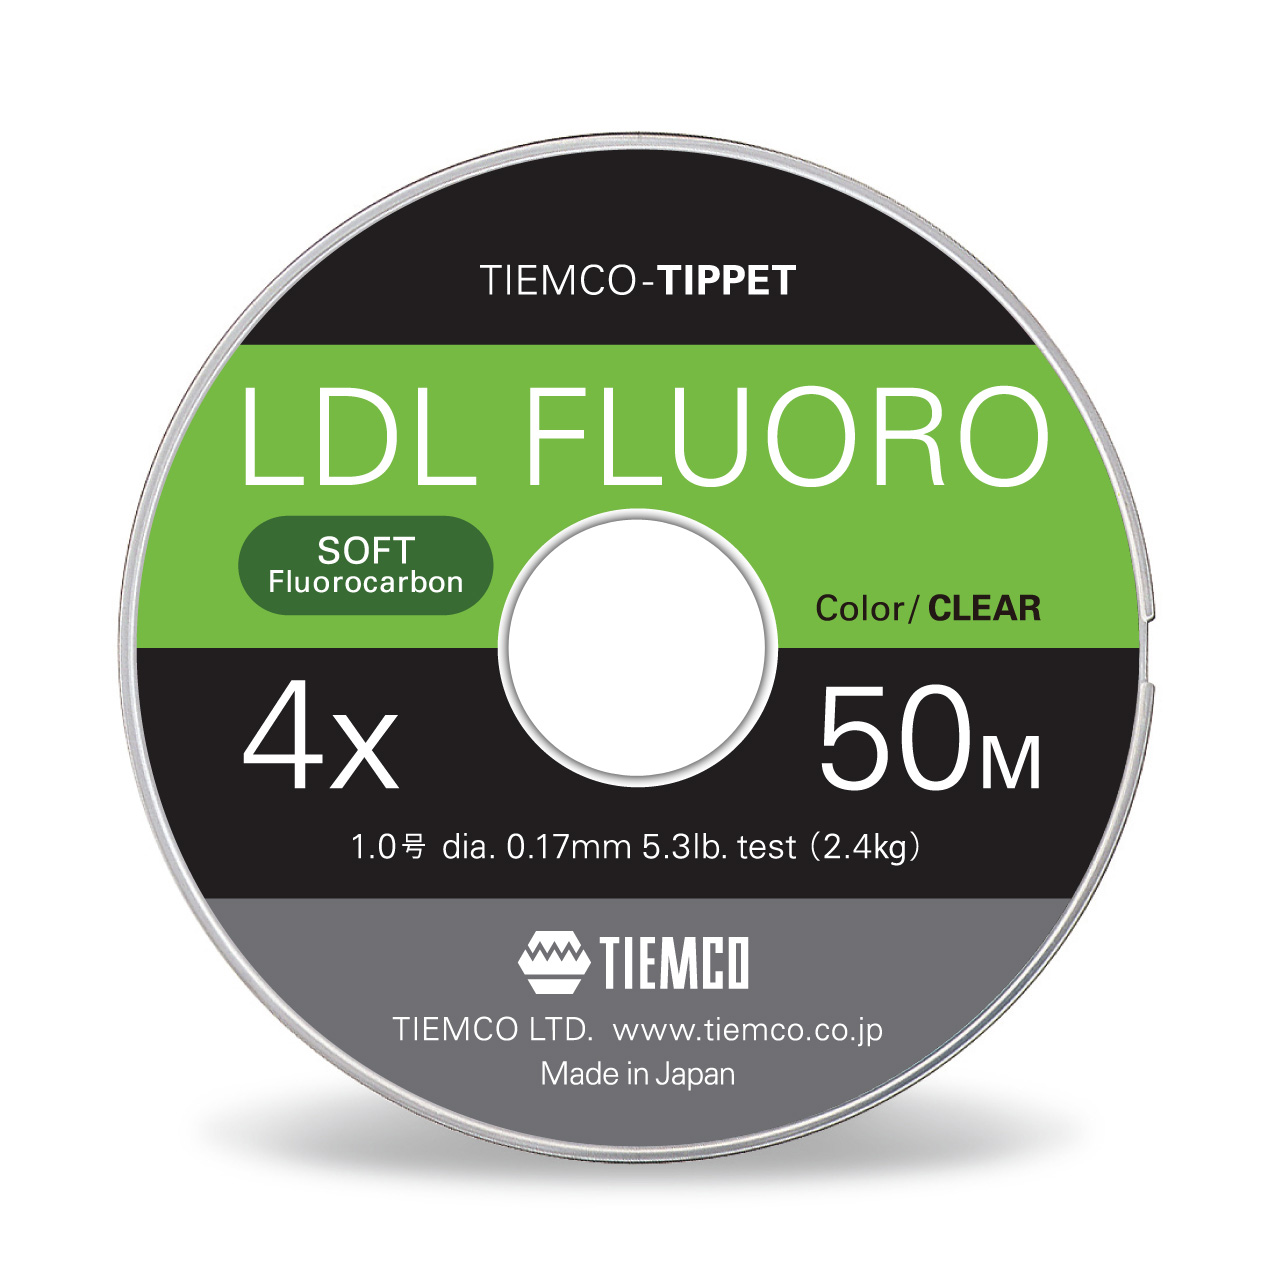 LDL Fluorocarbon Tippet Material